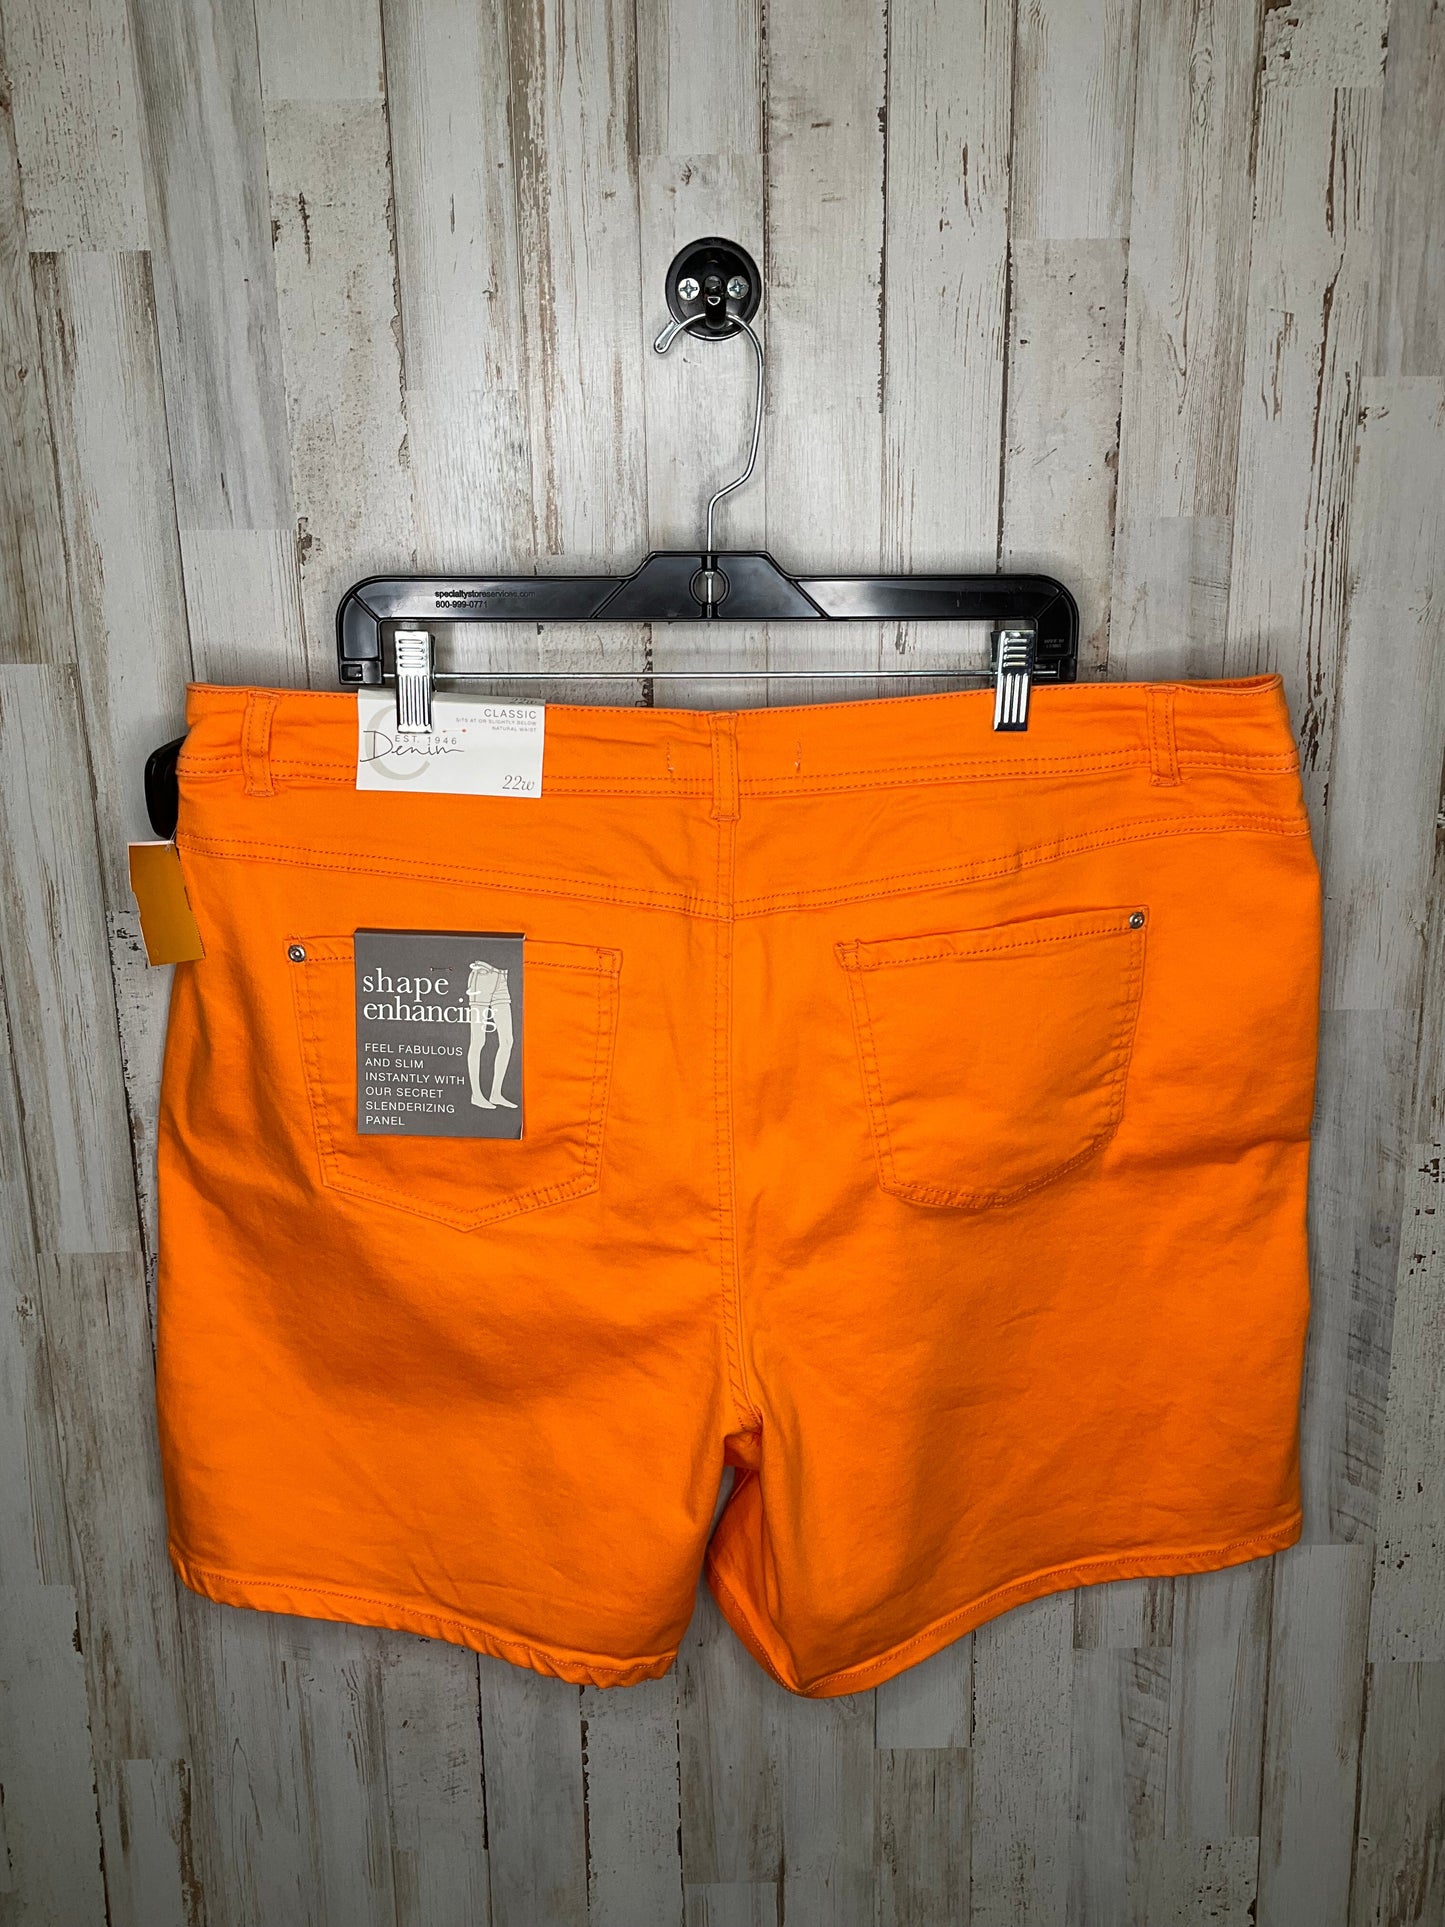 Shorts By Cato  Size: 22